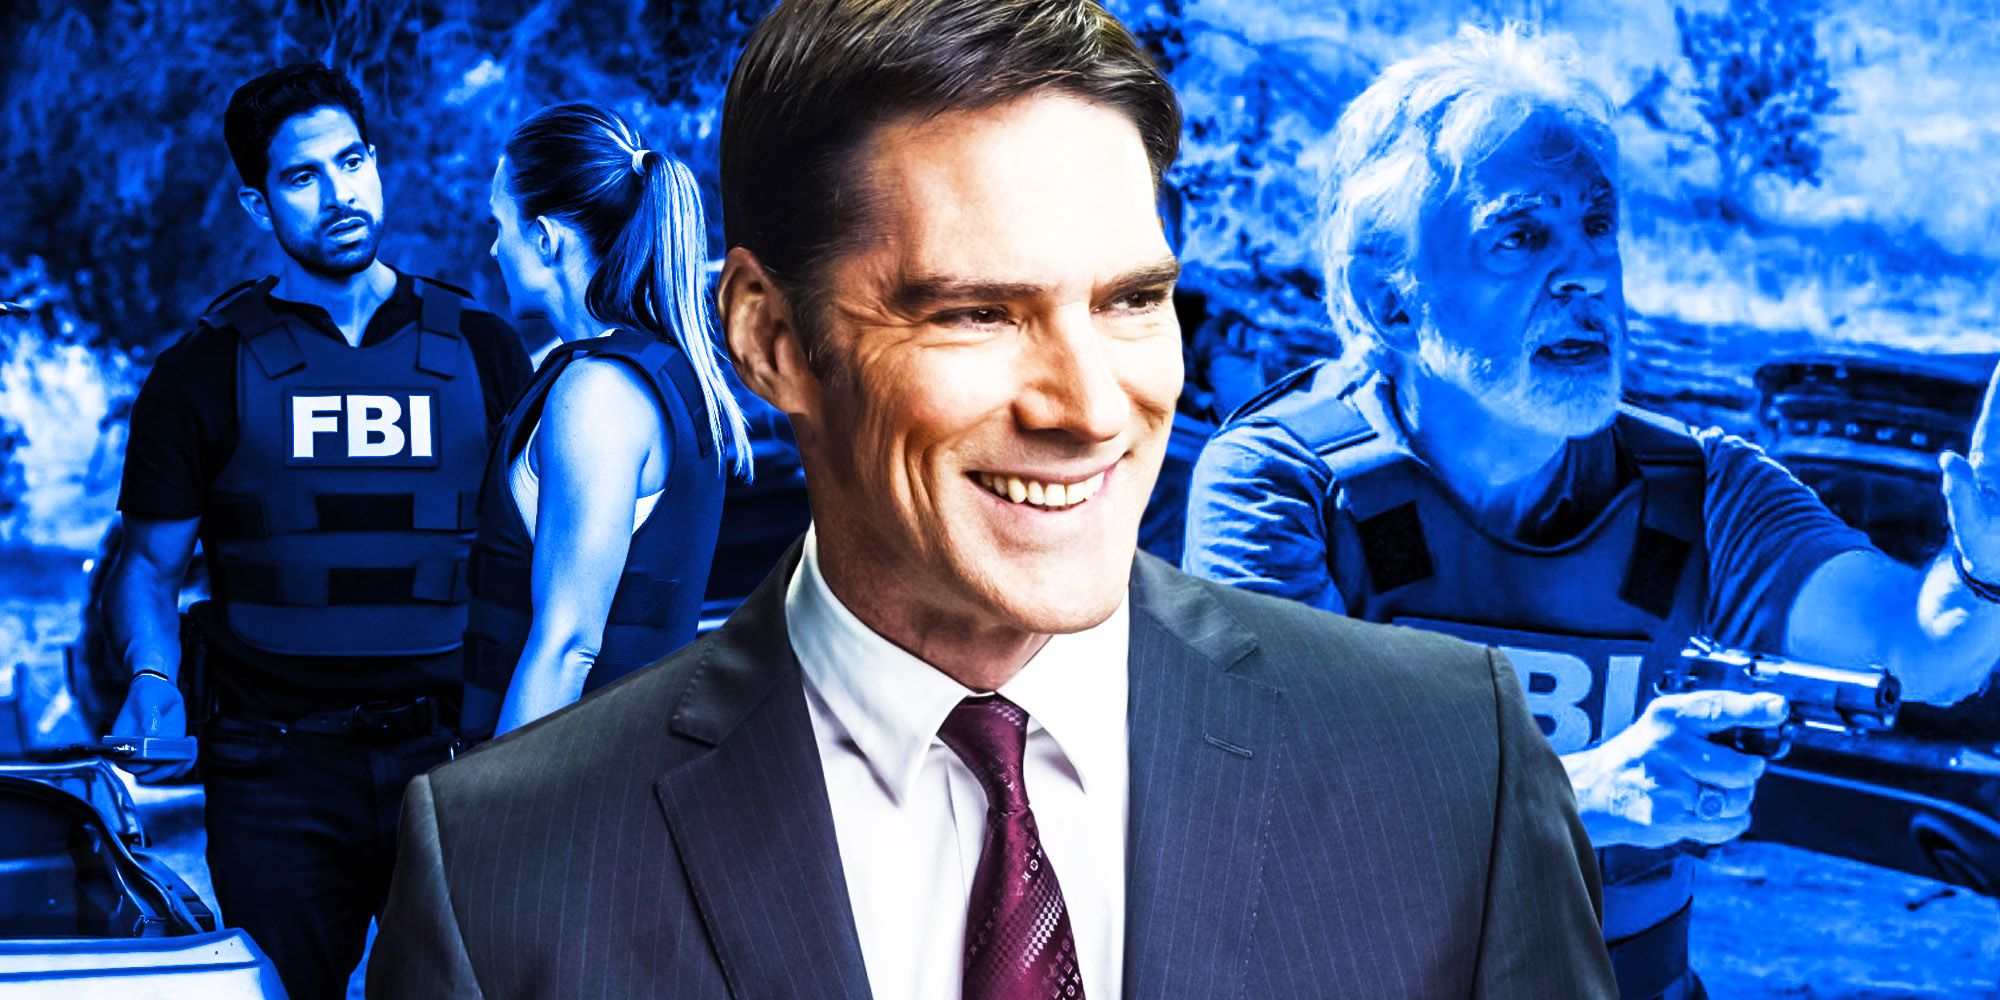 Criminal minds Hotch in front of reboot cast